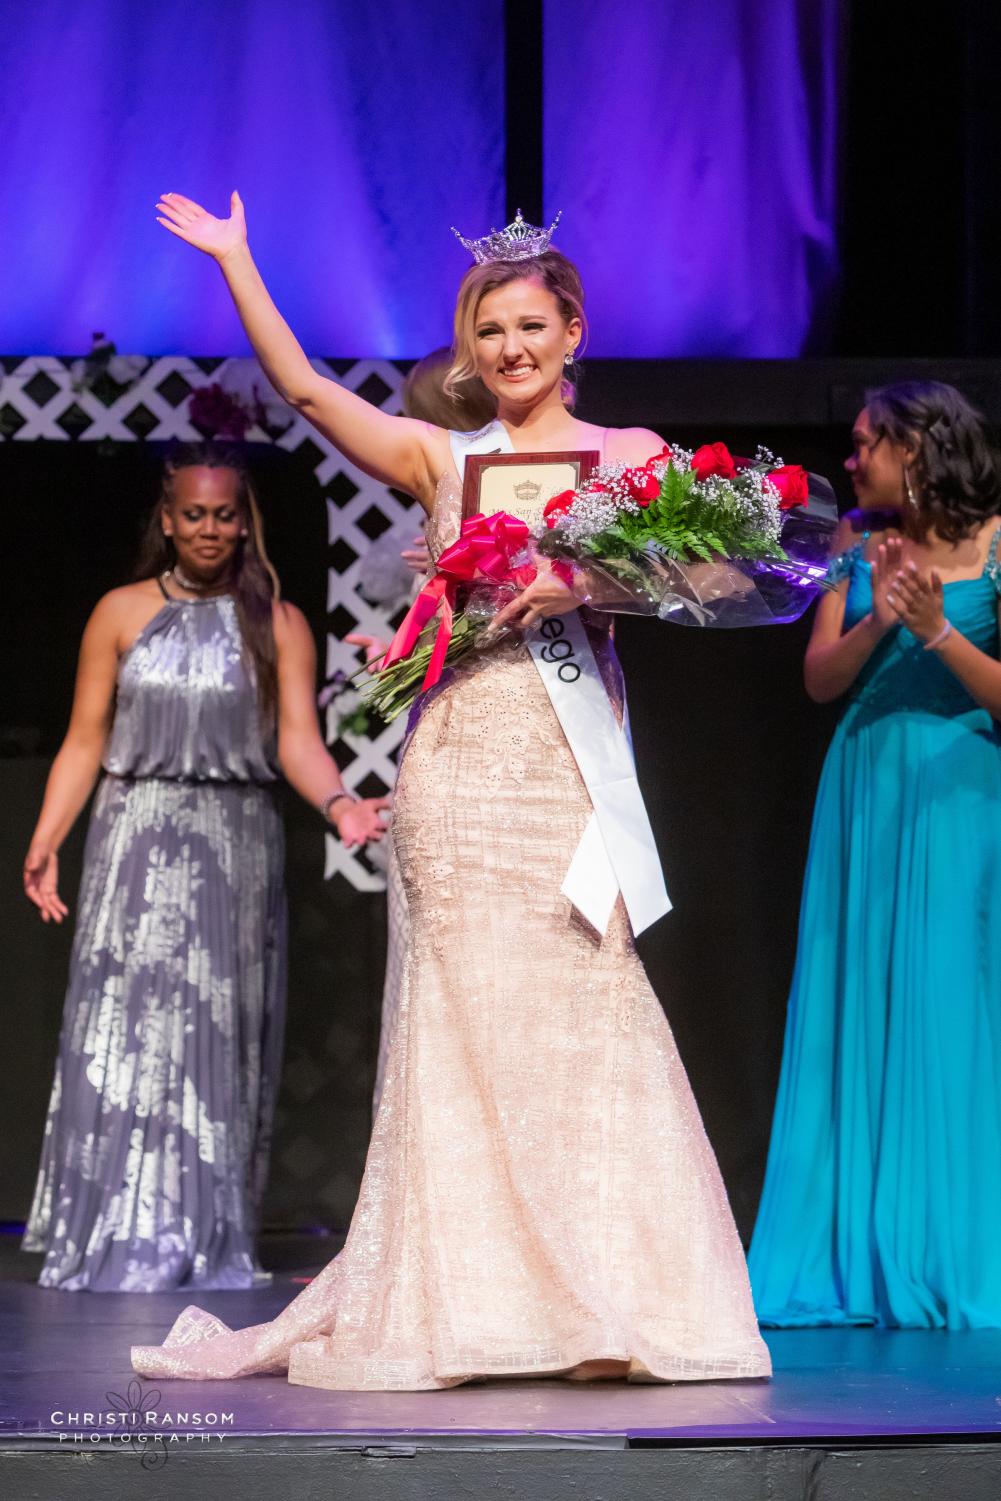 Students win scholarships and crowns in Miss San Diego beauty pageant